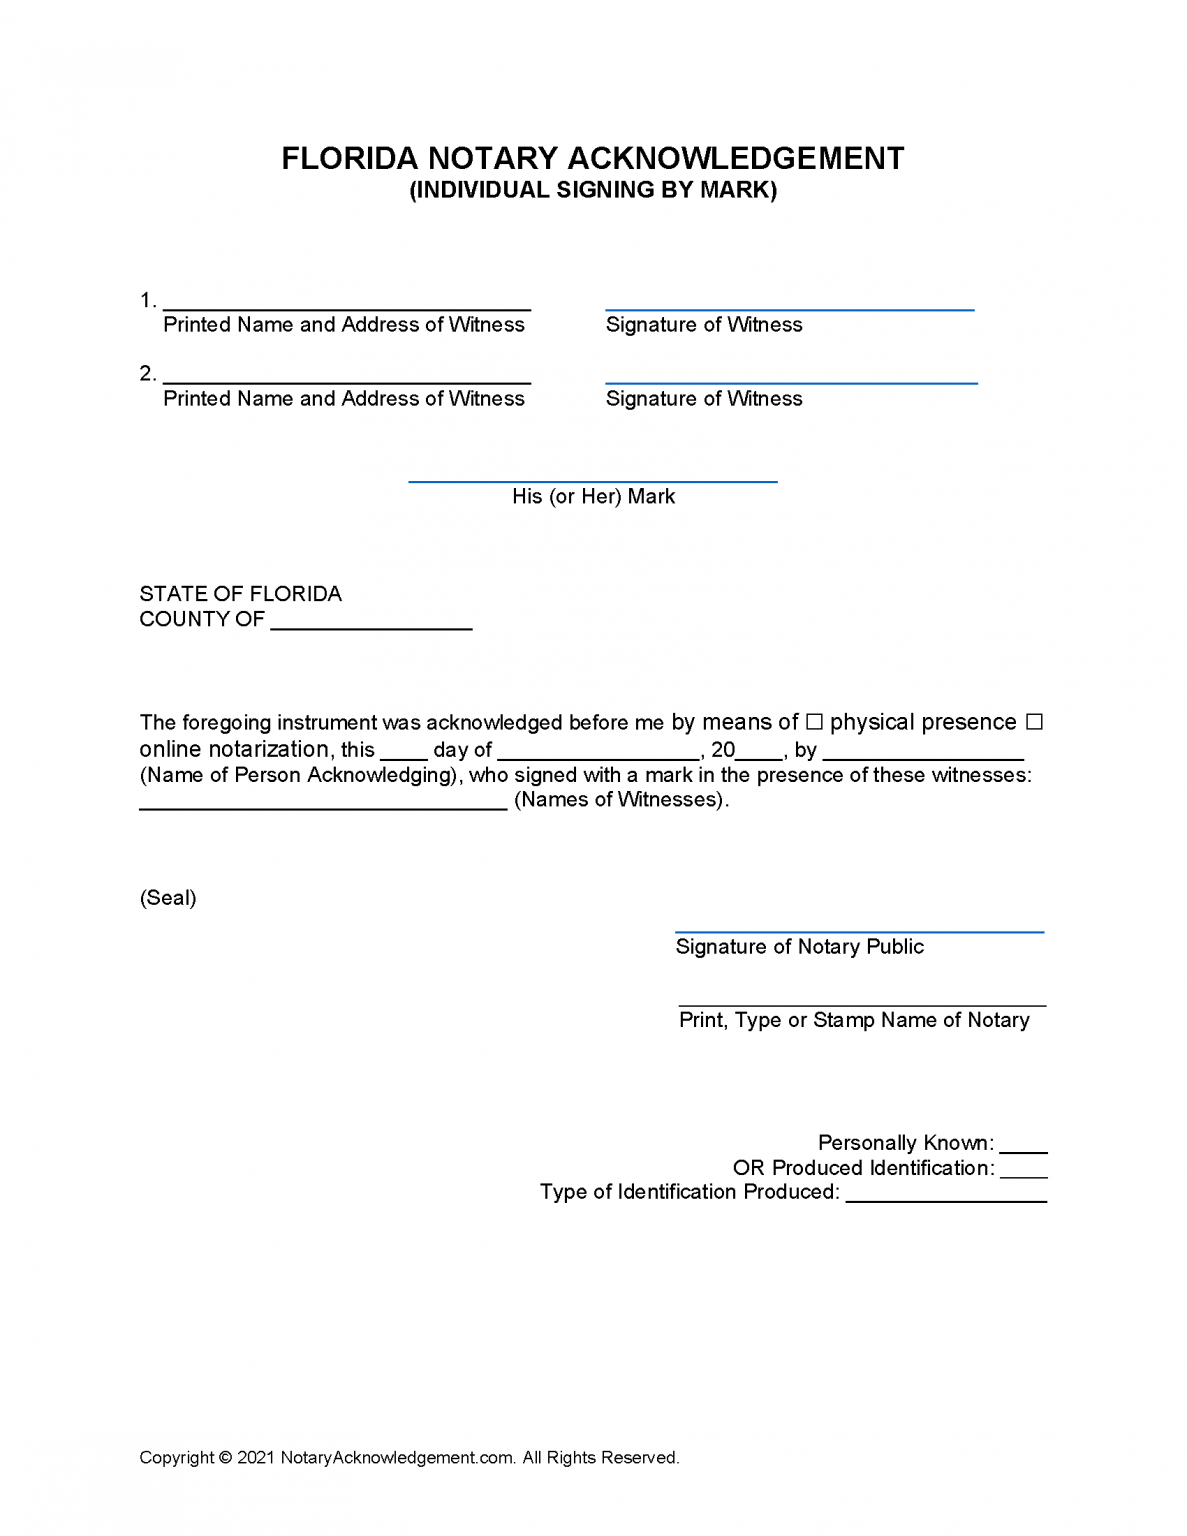 certificate of acknowledgement of notary public